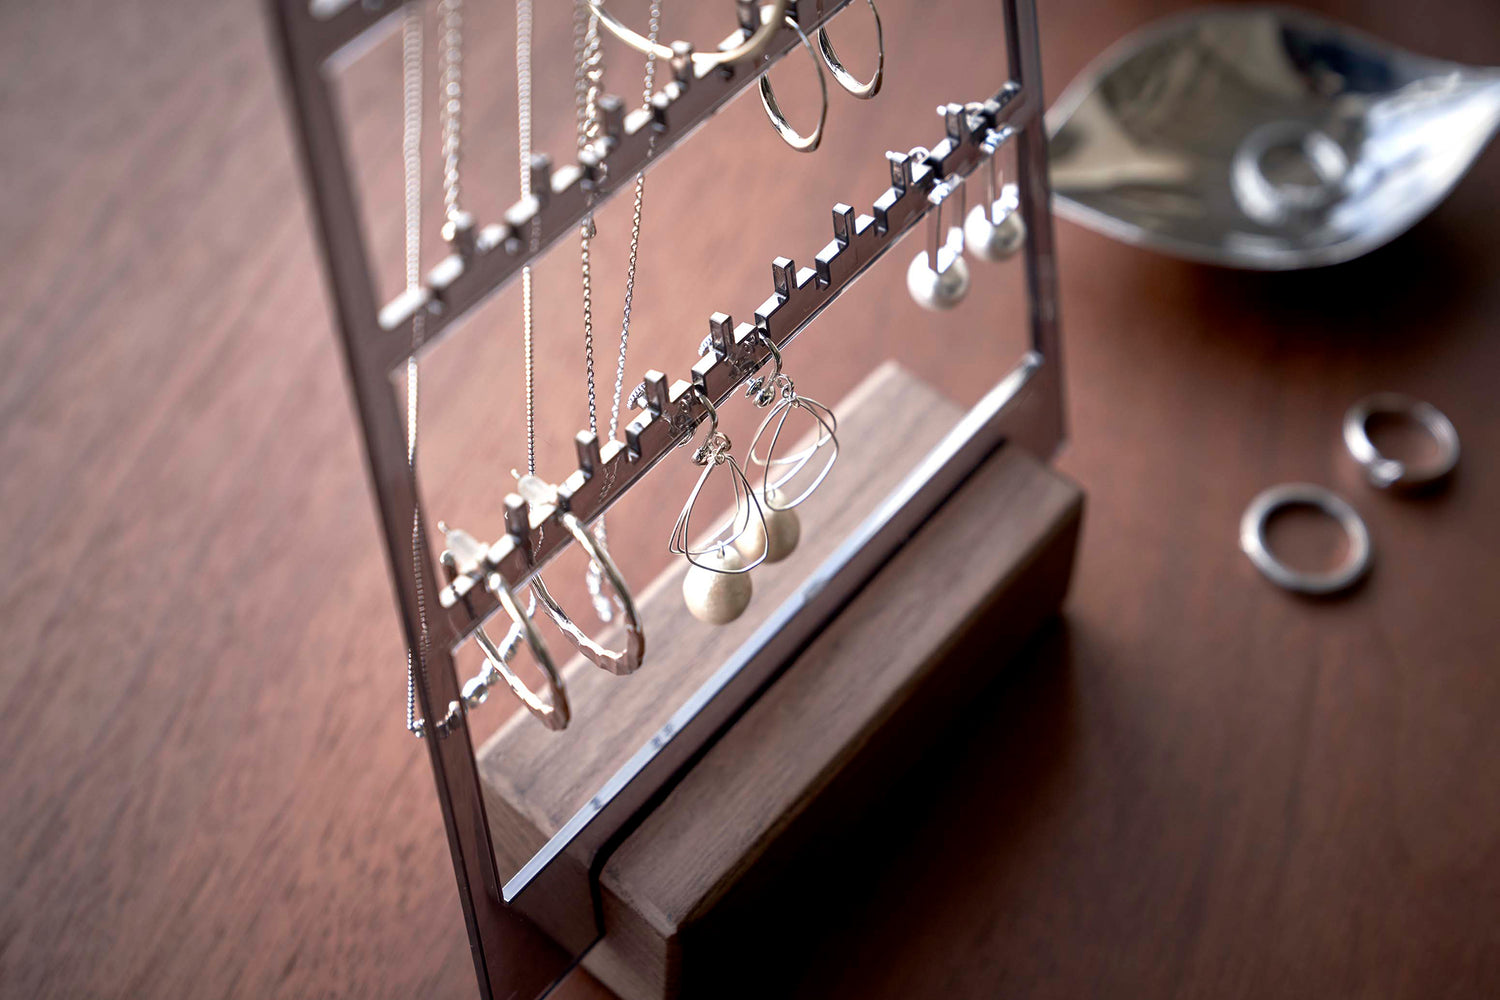 View 11 - A detailed view of an acrylic translucent mauve earring holder with a rectangular wooden base on a dark wood dresser. The acrylic holder has upward pointed hooks and slots placed in an interchangeable pattern. Hanging from the hooks are chained necklaces, and in the slots are various earrings.